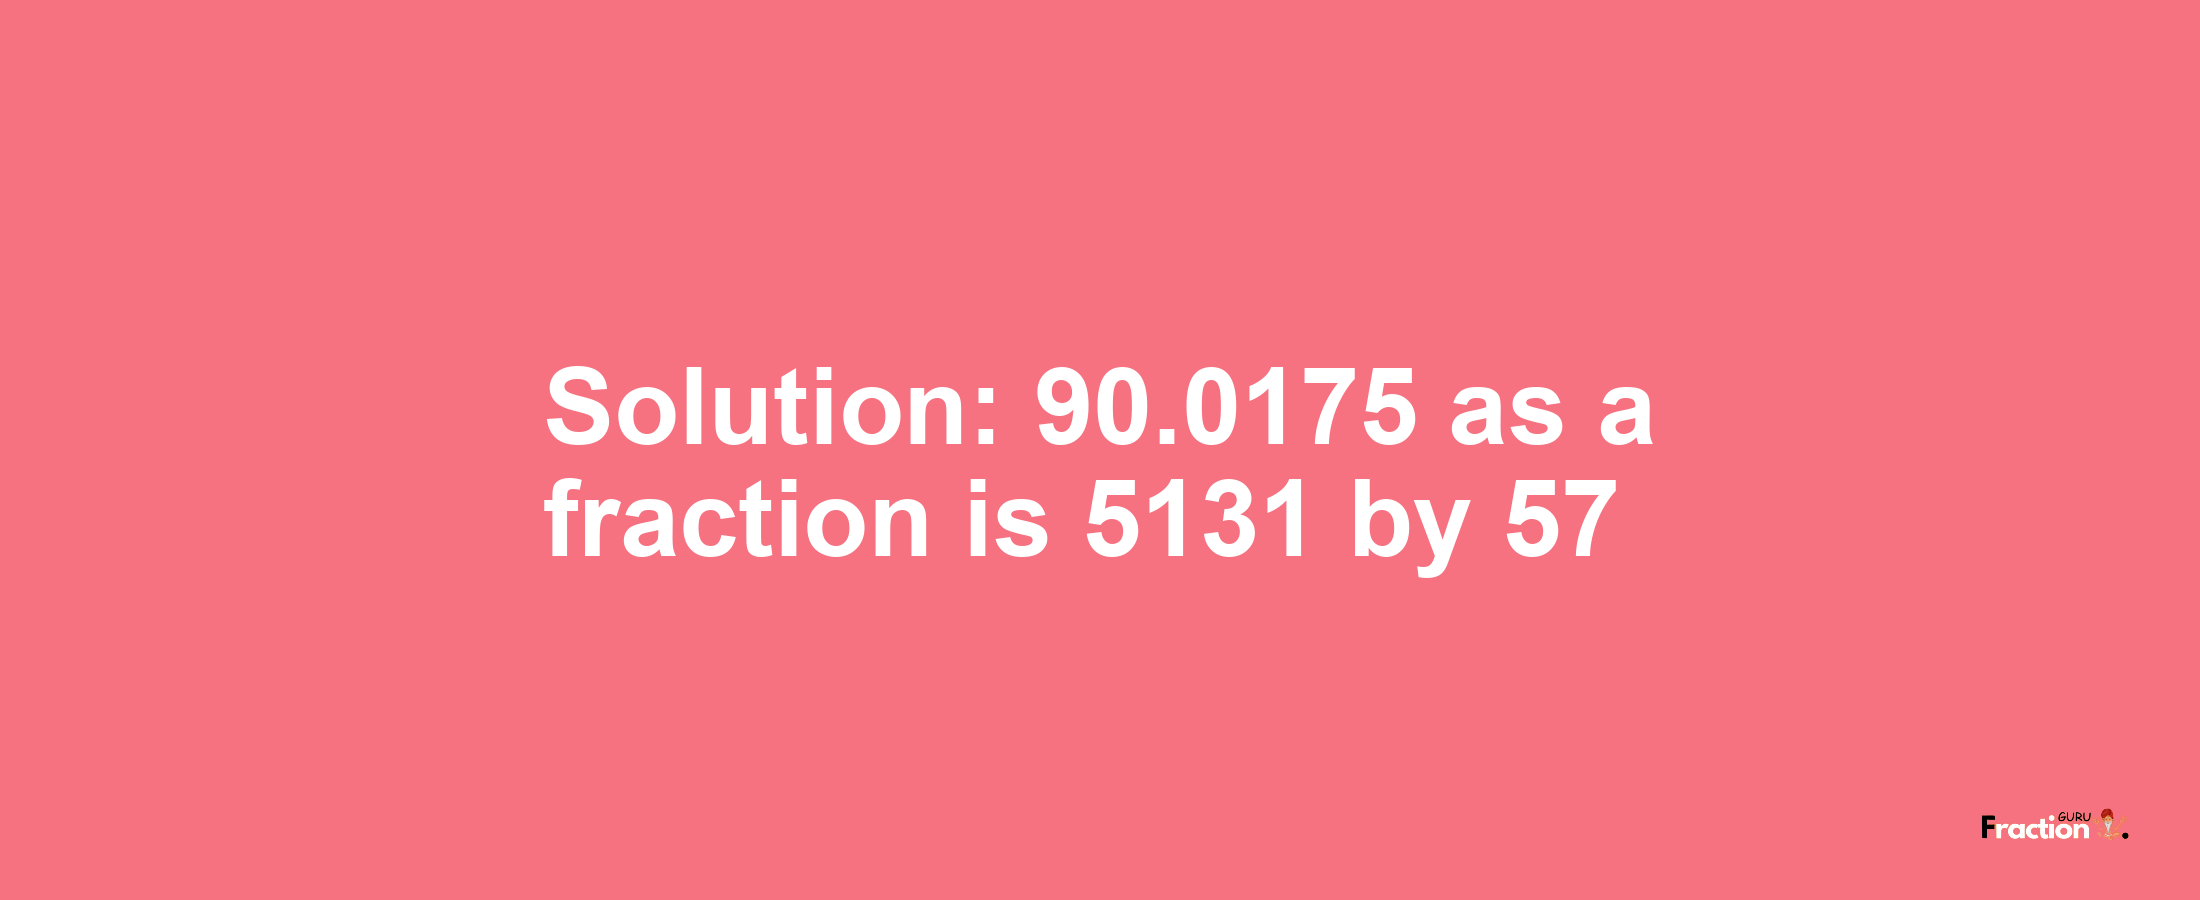 Solution:90.0175 as a fraction is 5131/57